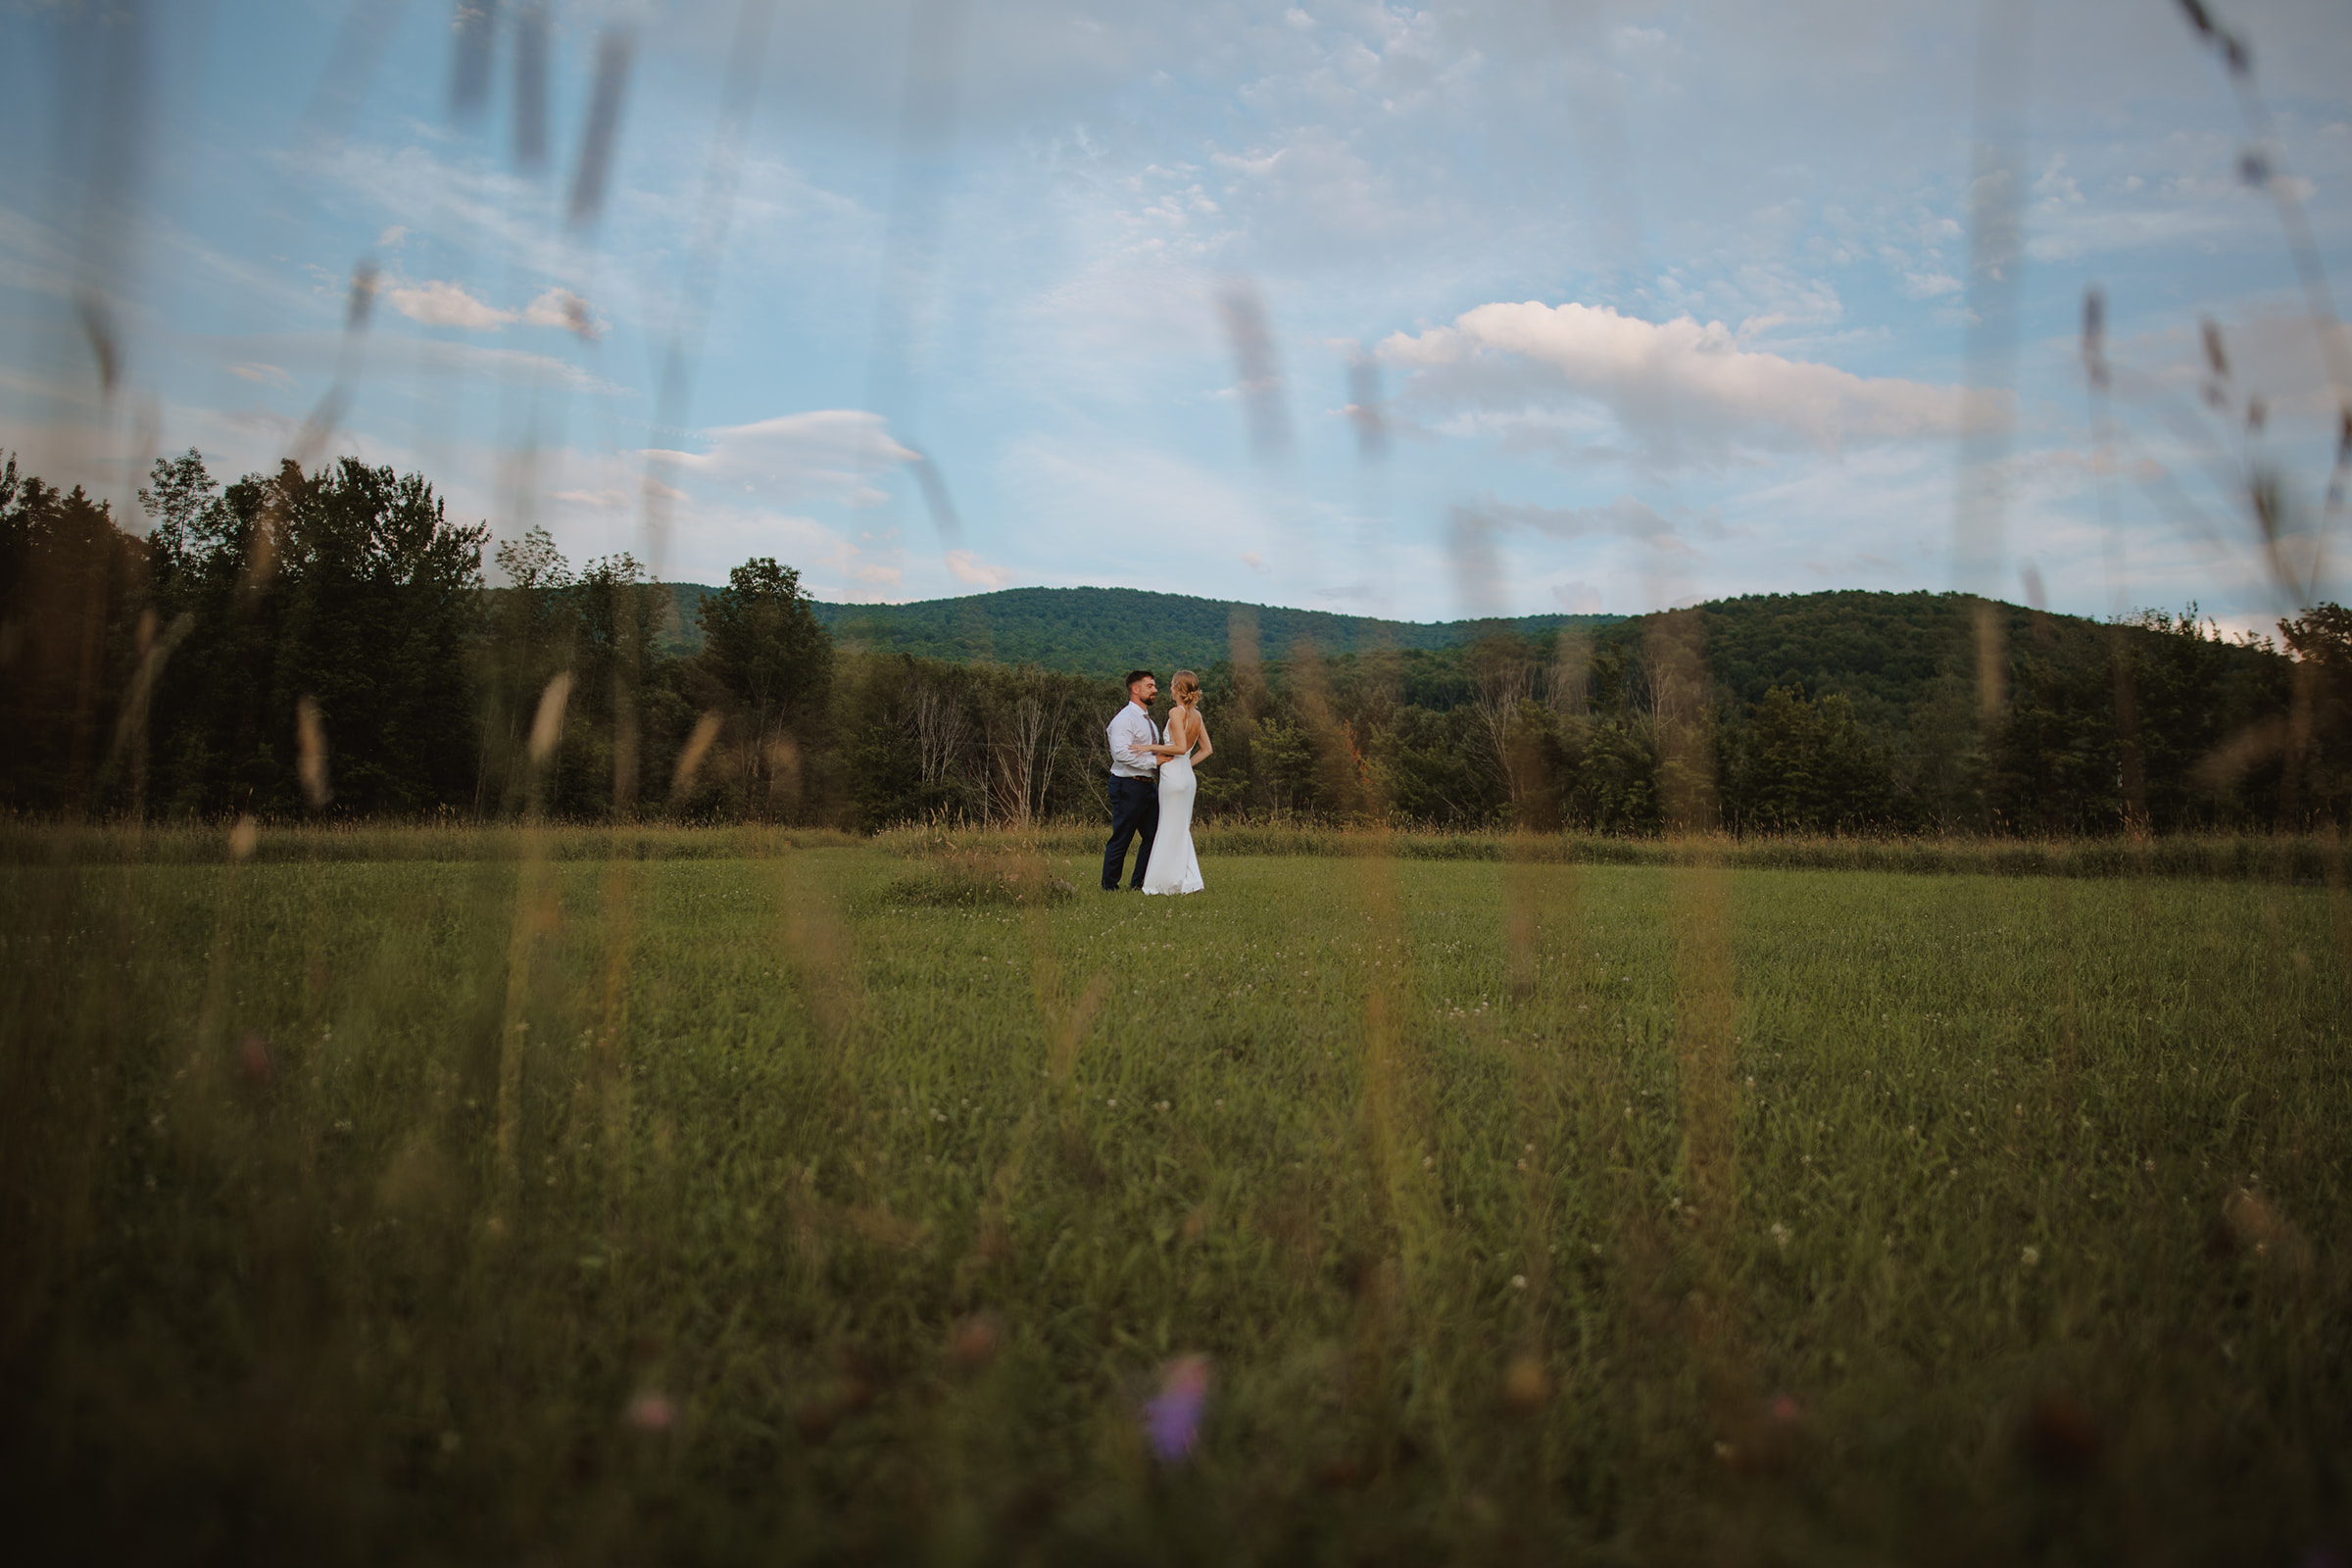 Just married couple stands in her uncle's field in the Catskills surrounded by overgrown grass and wildflowers